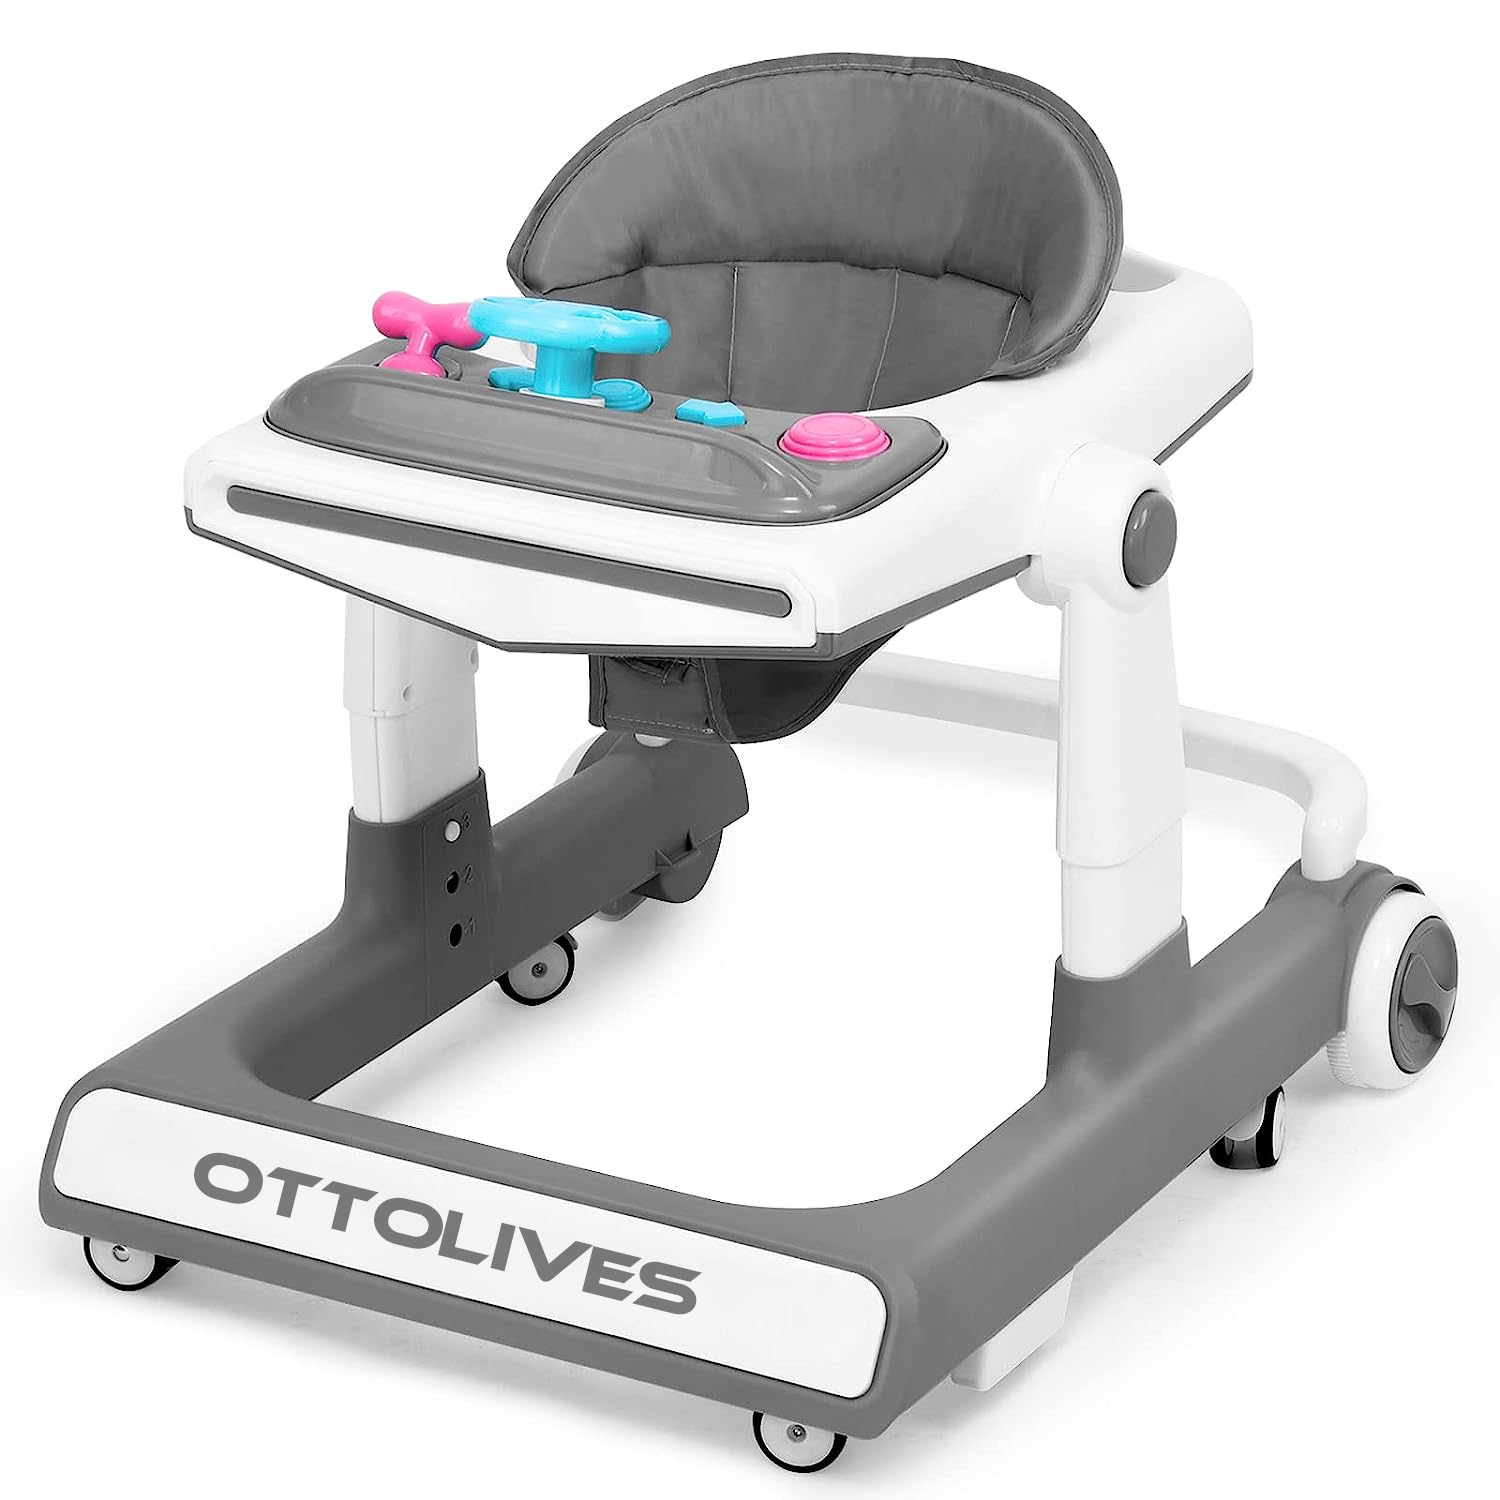 OTTOLIVES Baby Walker Foldable Adjustable Height, Multi-Function Anti-Rollover Toddler Walker, Suitable for All terrains for Babies Boys and Girls 7-15 Months